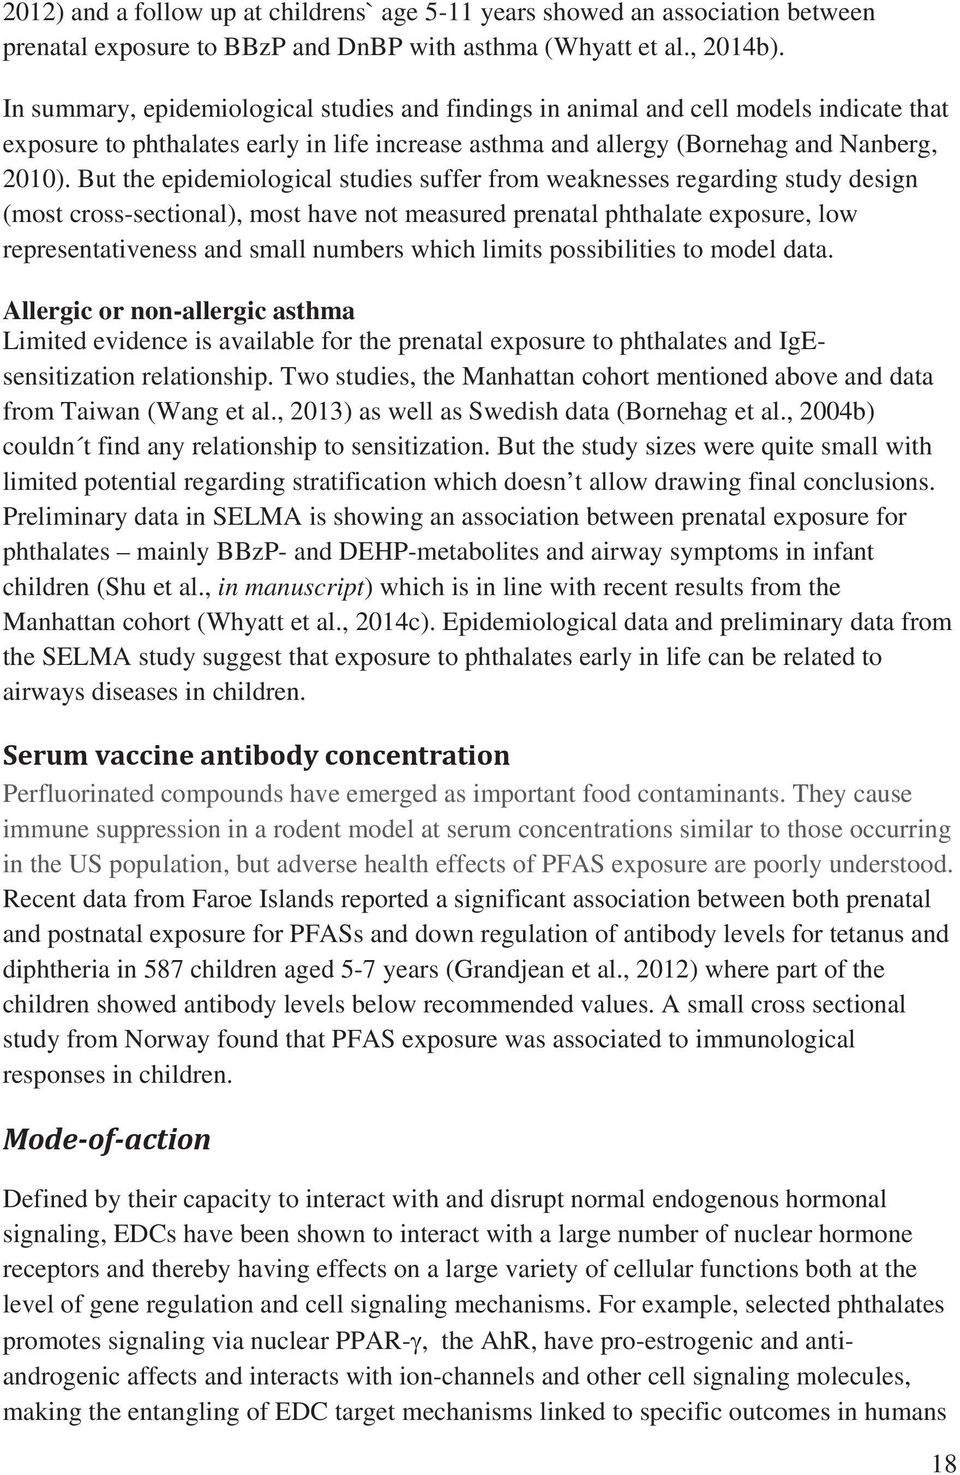 But the epidemiological studies suffer from weaknesses regarding study design (most cross-sectional), most have not measured prenatal phthalate exposure, low representativeness and small numbers